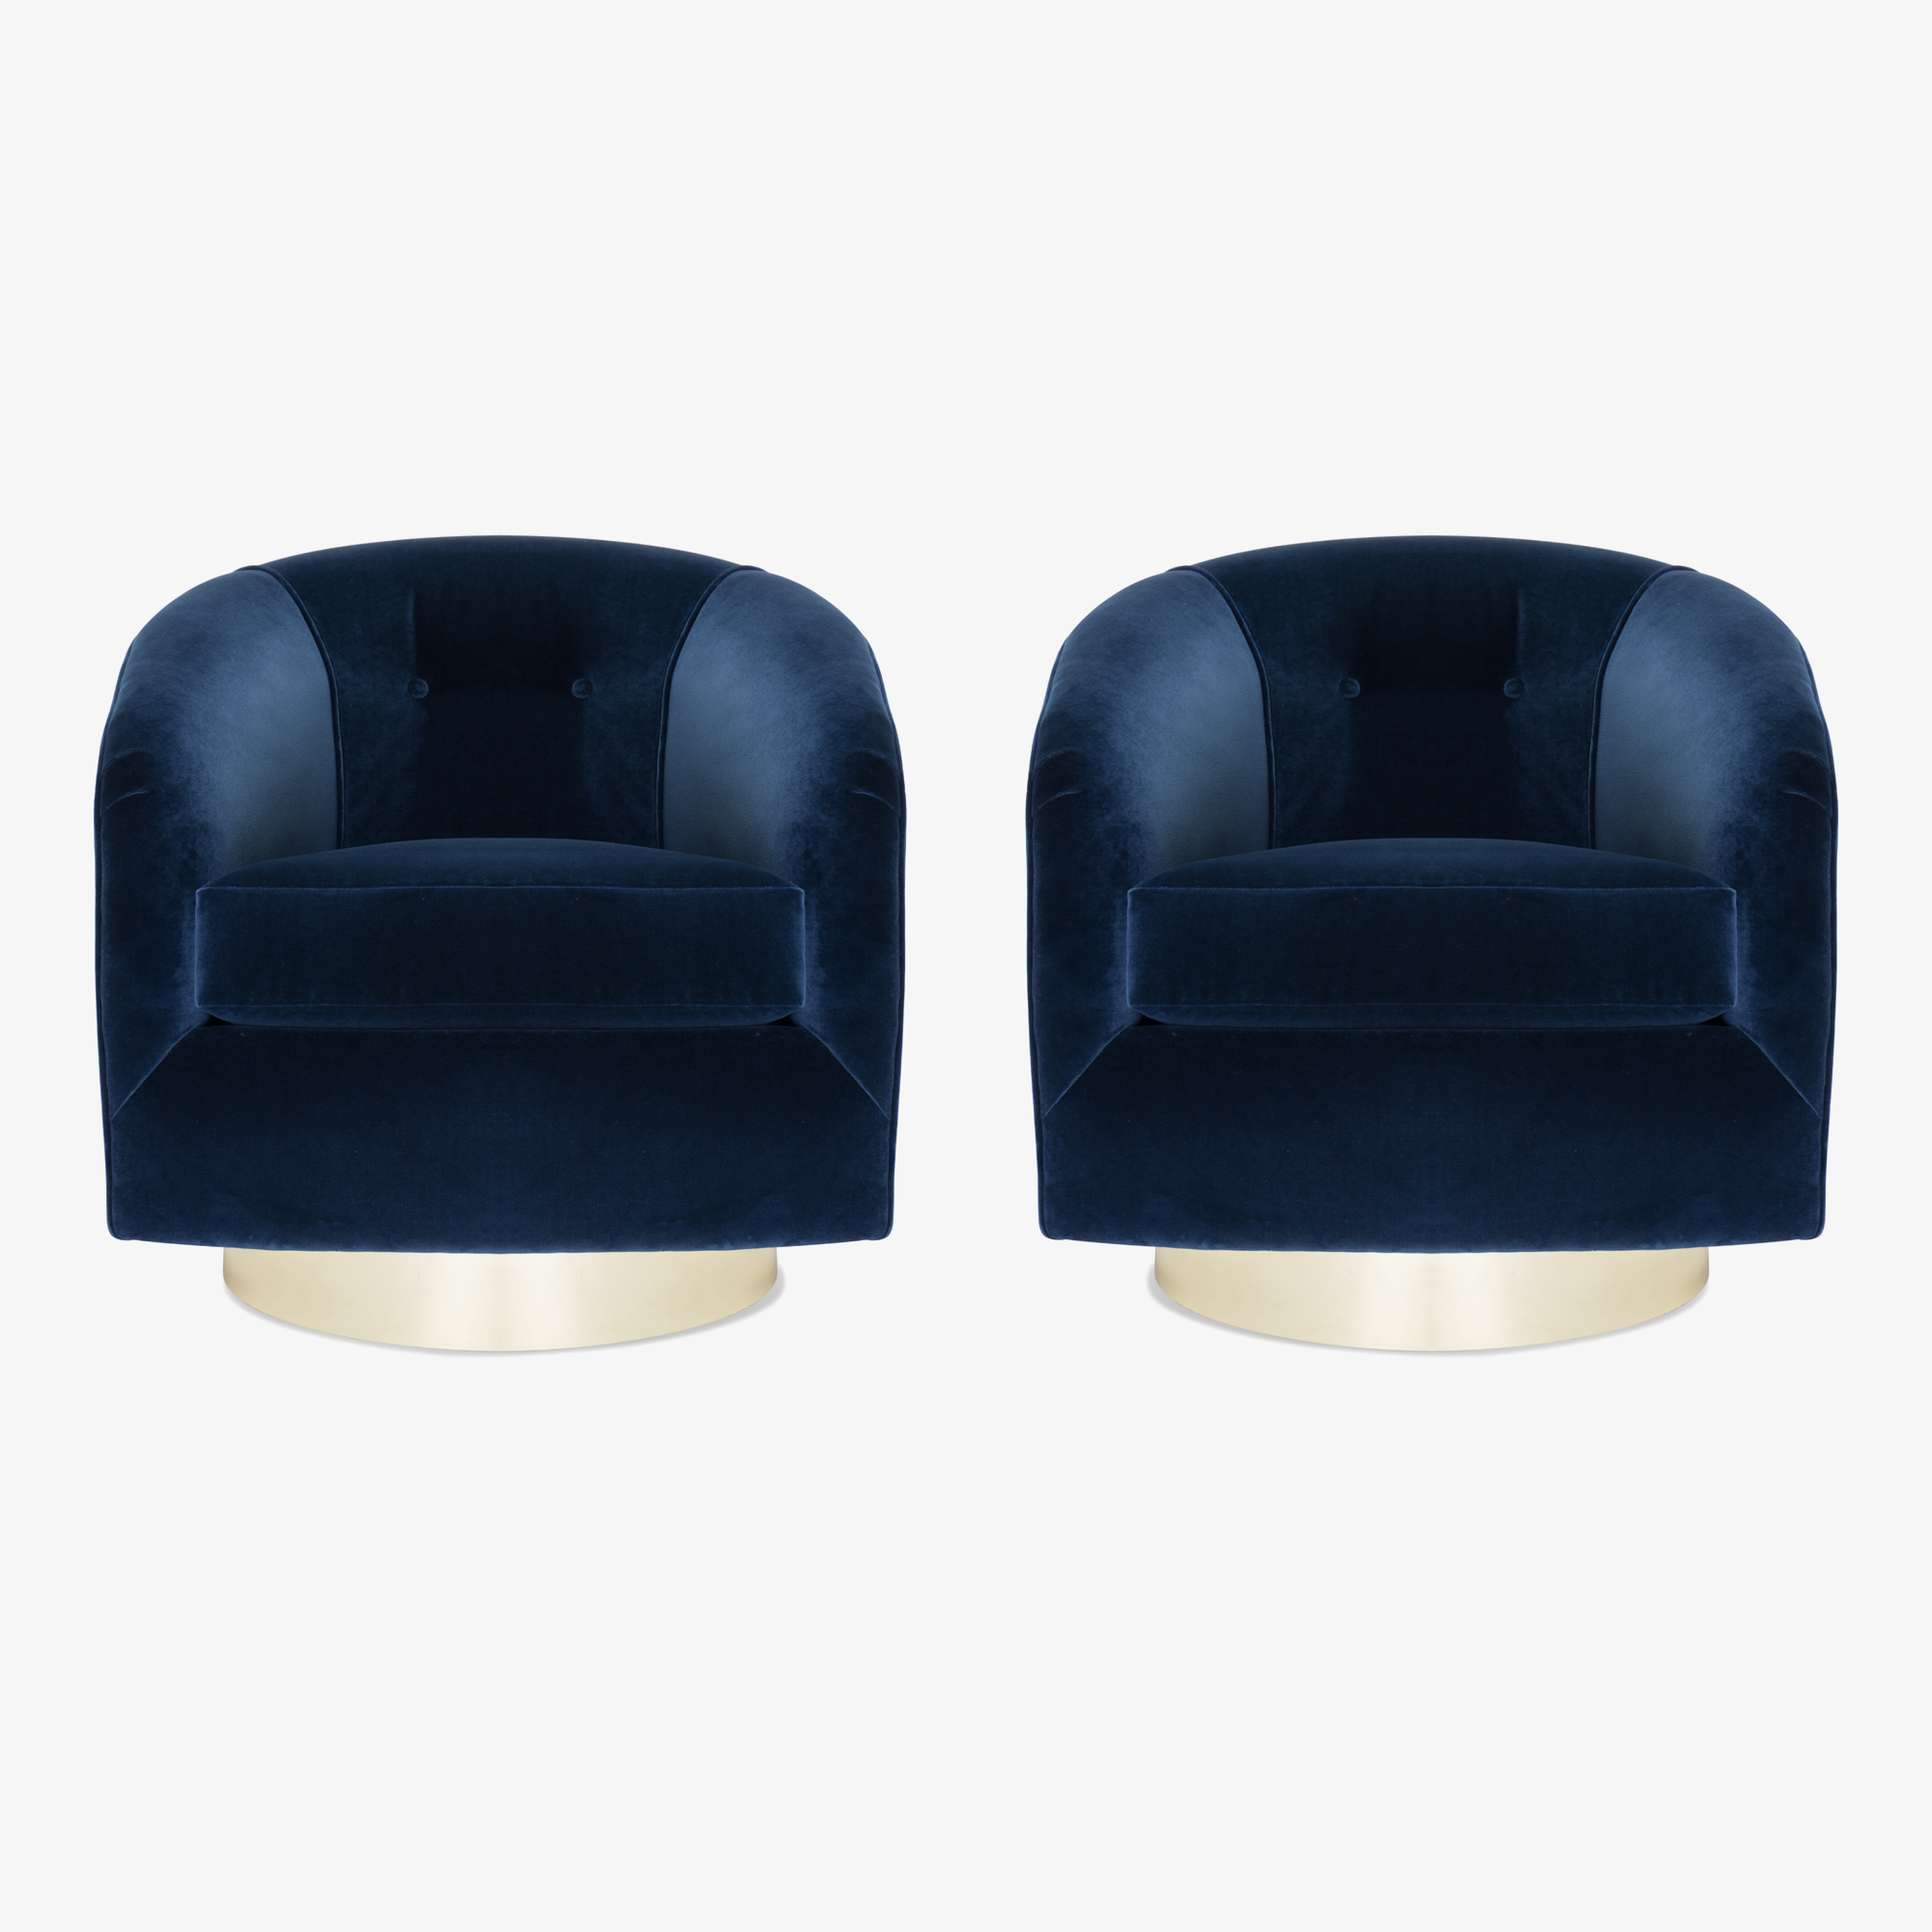 Swivel Tub Chairs in Navy Velvet with Polished Brass Bases, Pair.png